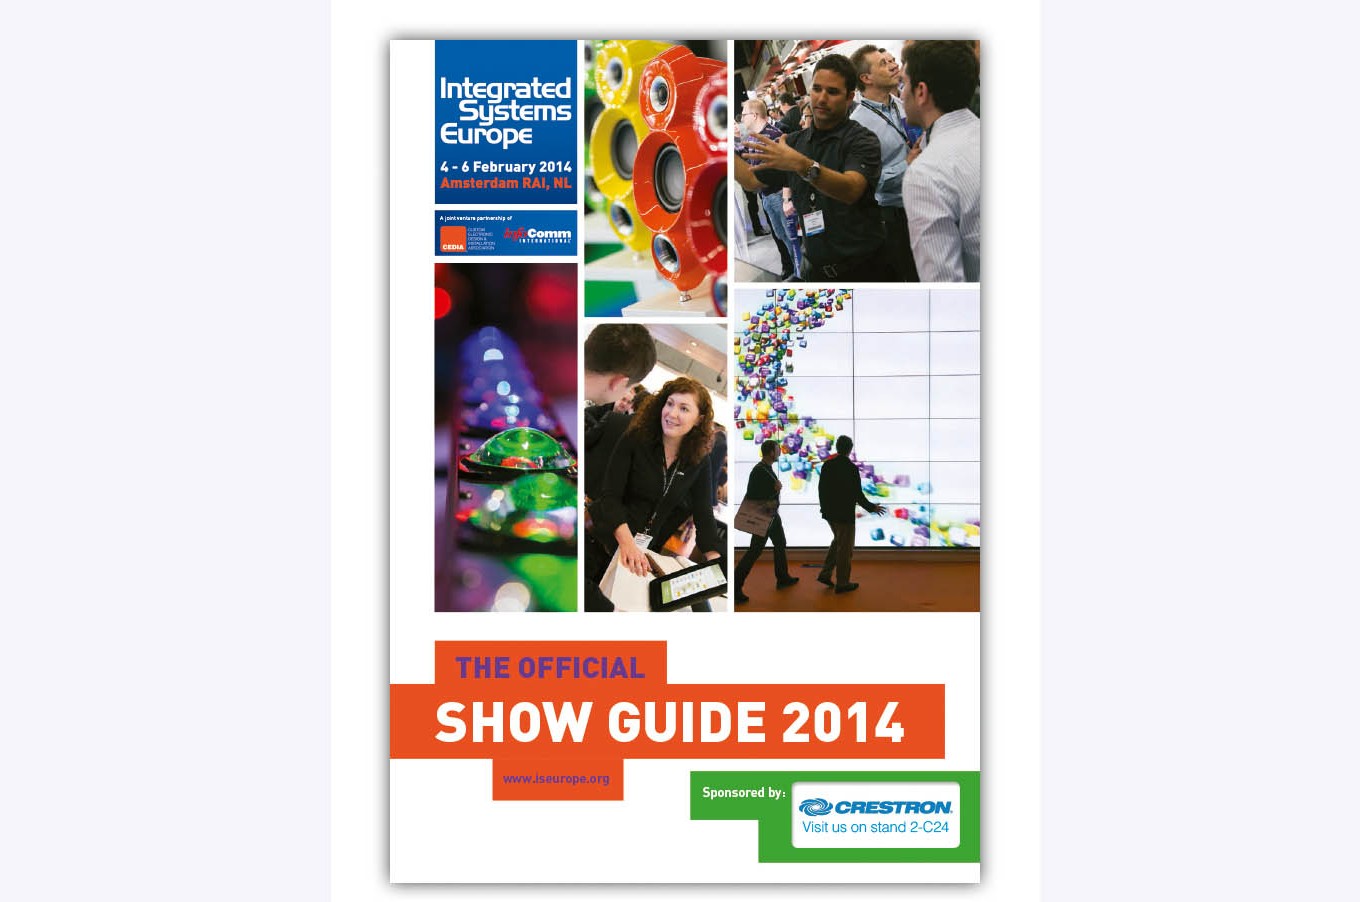 Plan your ISE 2014 visit by viewing our digital Show Guide